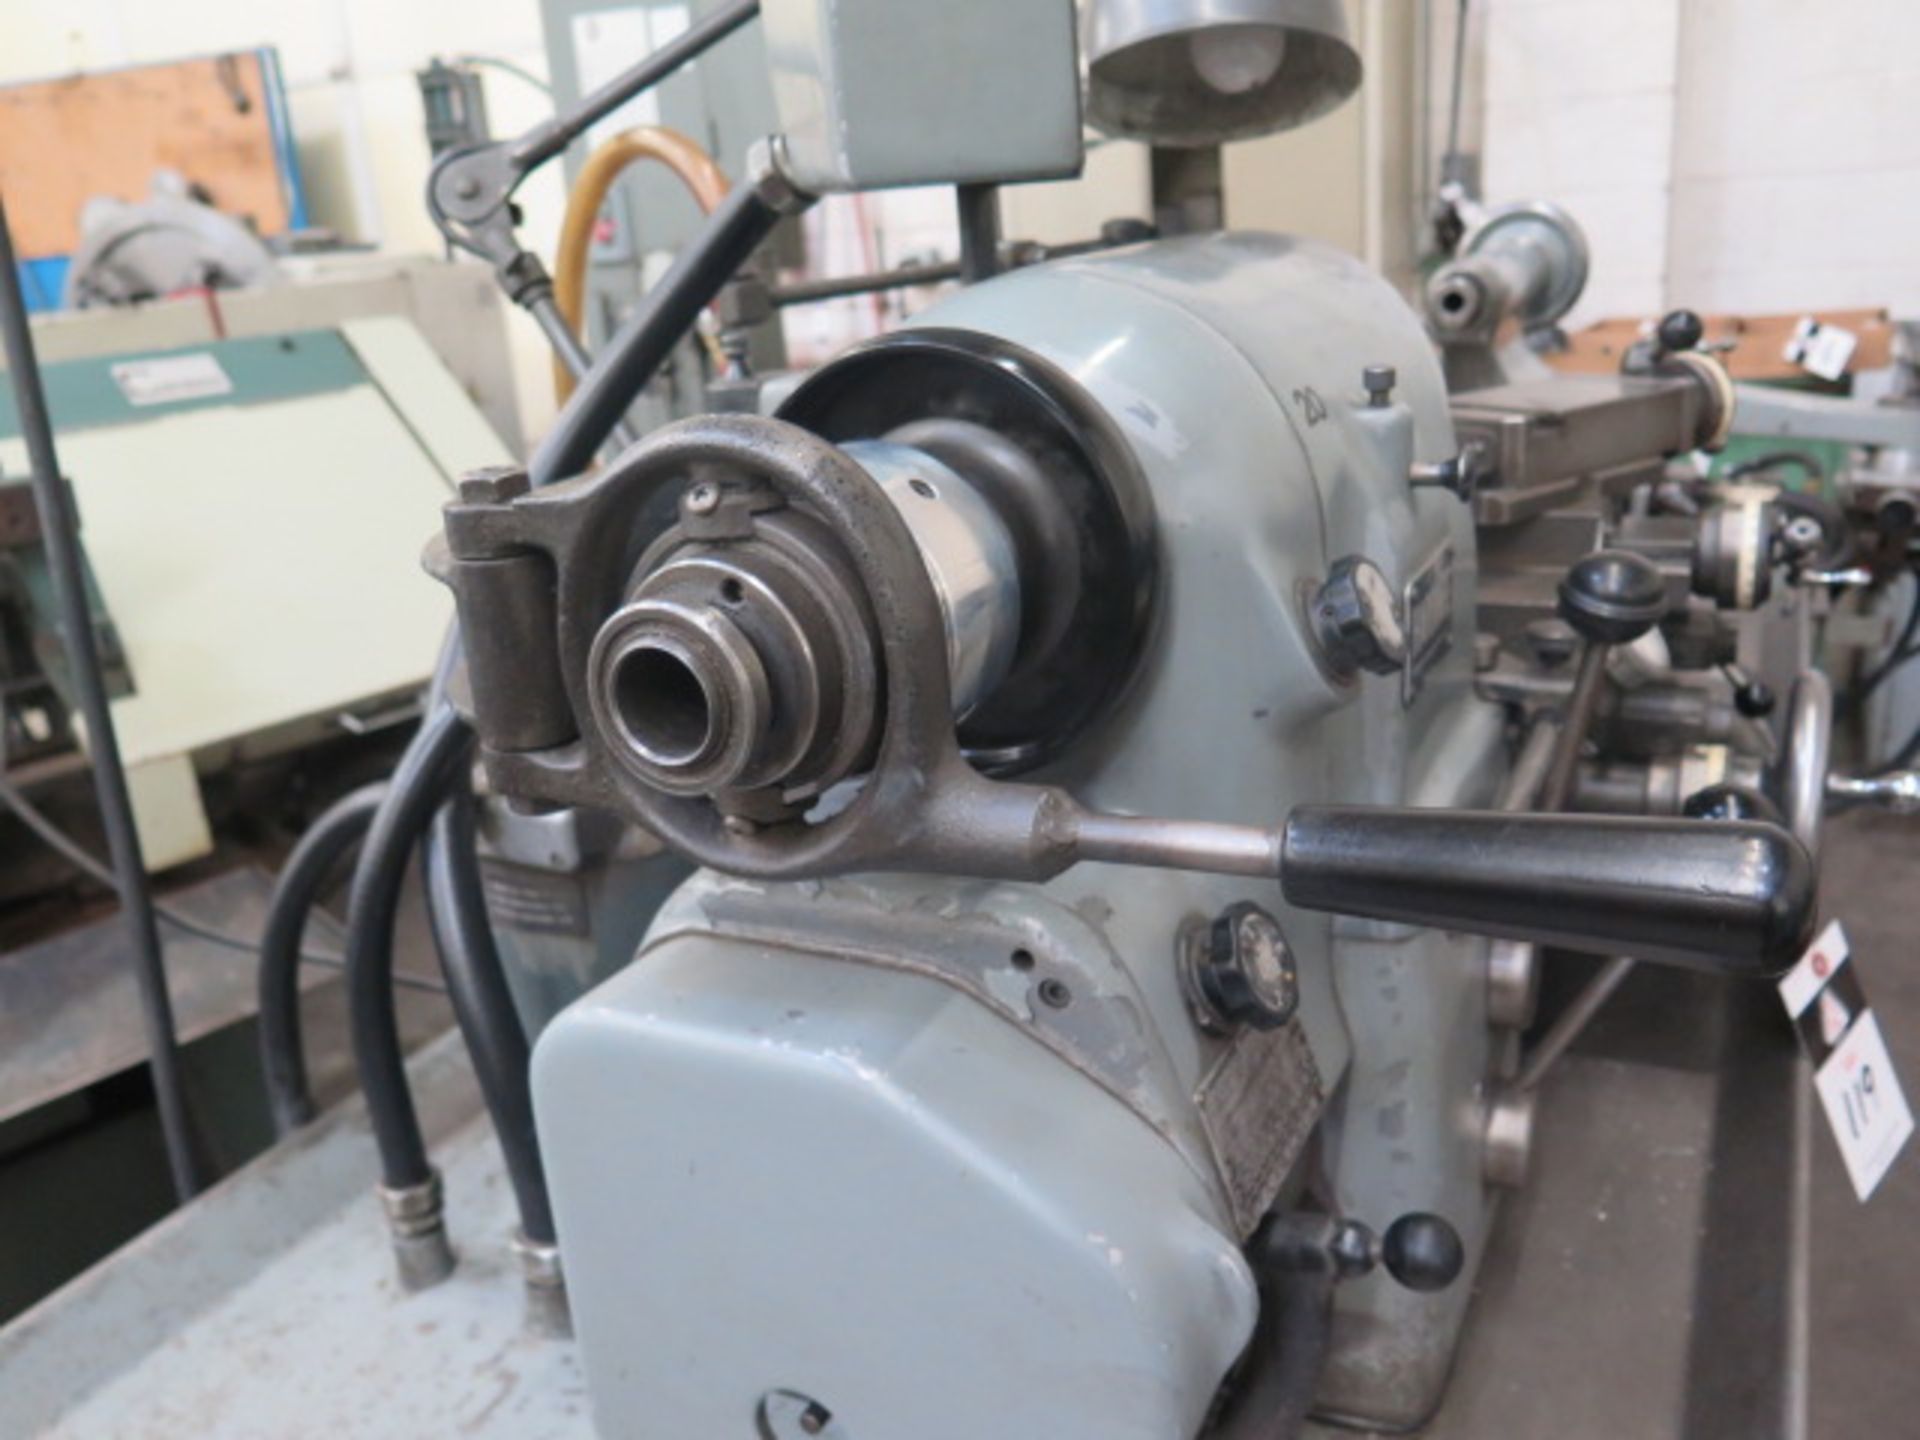 Hardinge HLV-H Tool Room Lathe s/n HLV-H-4836 w/ 125-3000 RPM, Inch Threading, Tailstock, SOLD AS IS - Image 11 of 14